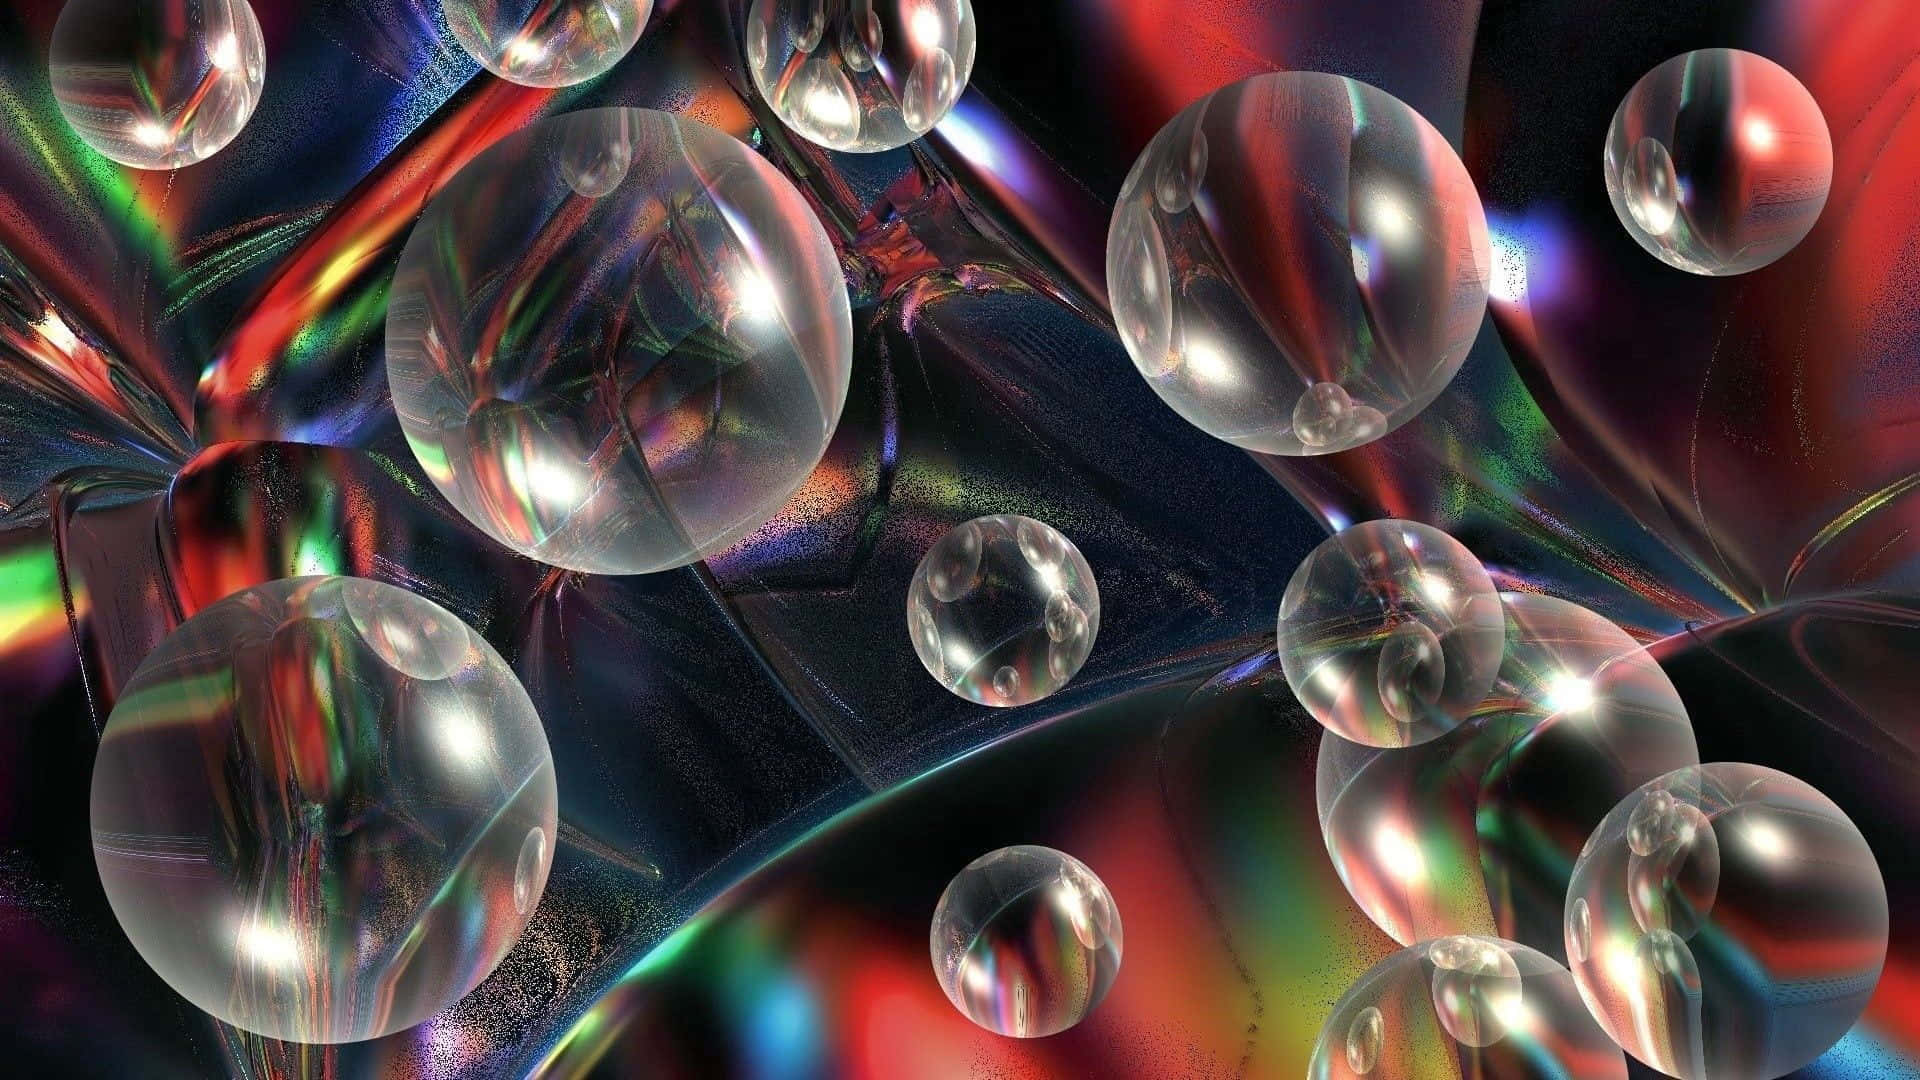 A Colorful Abstract Image Of Bubbles